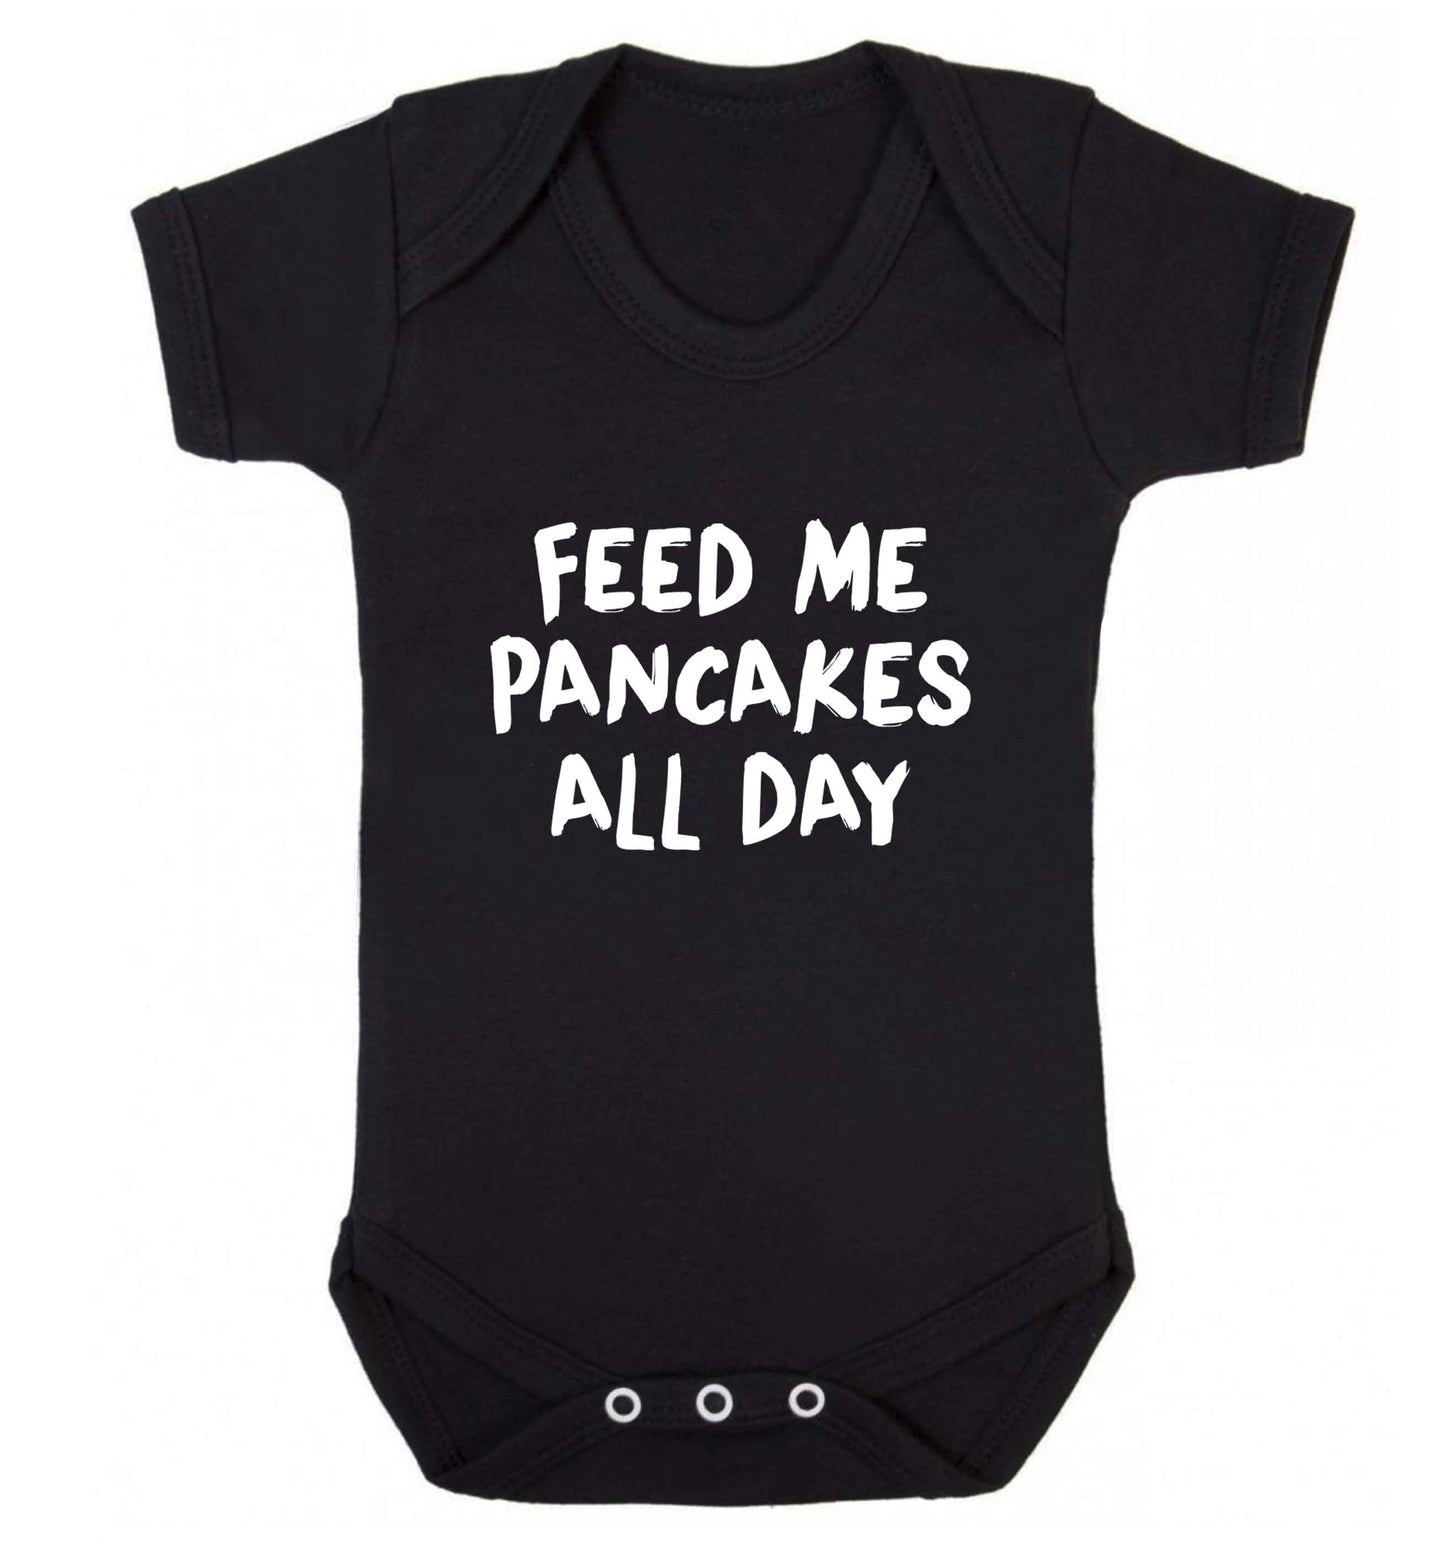 Feed me pancakes all day baby vest black 18-24 months